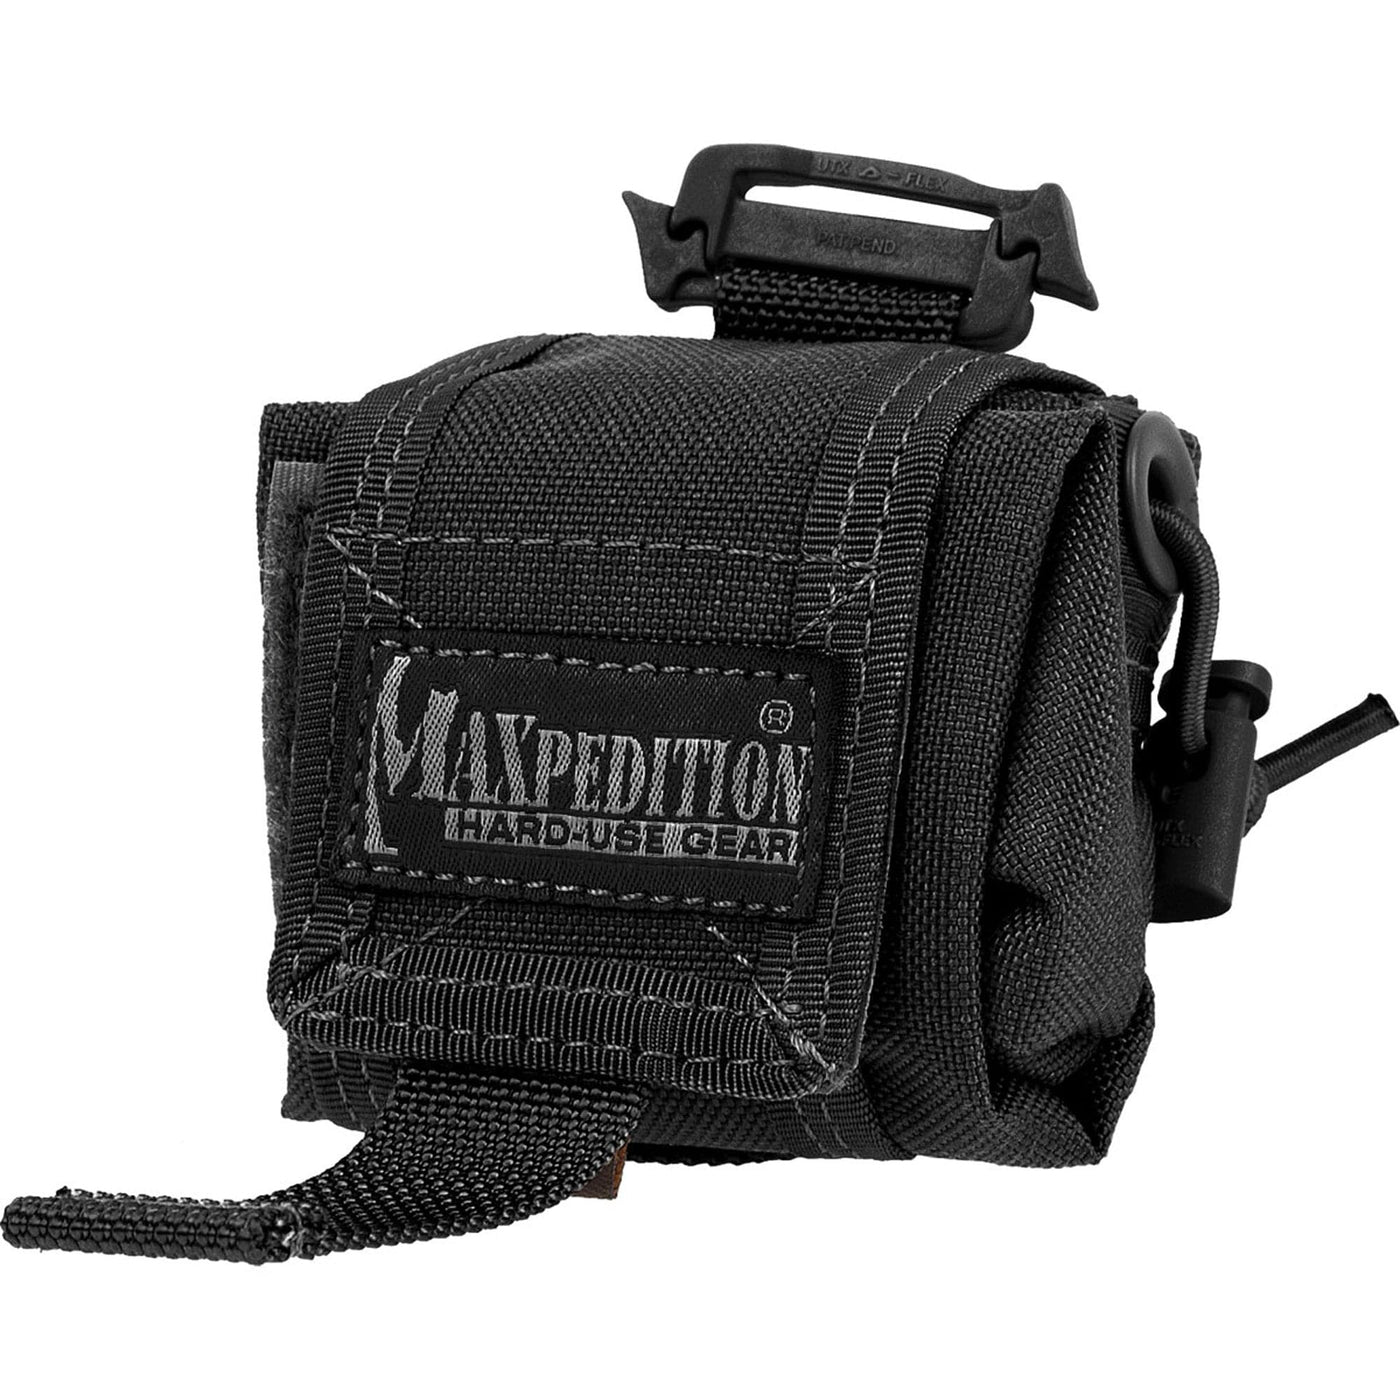 Maxpedition Maxpedition Rollypoly Dump Pch Black Holsters